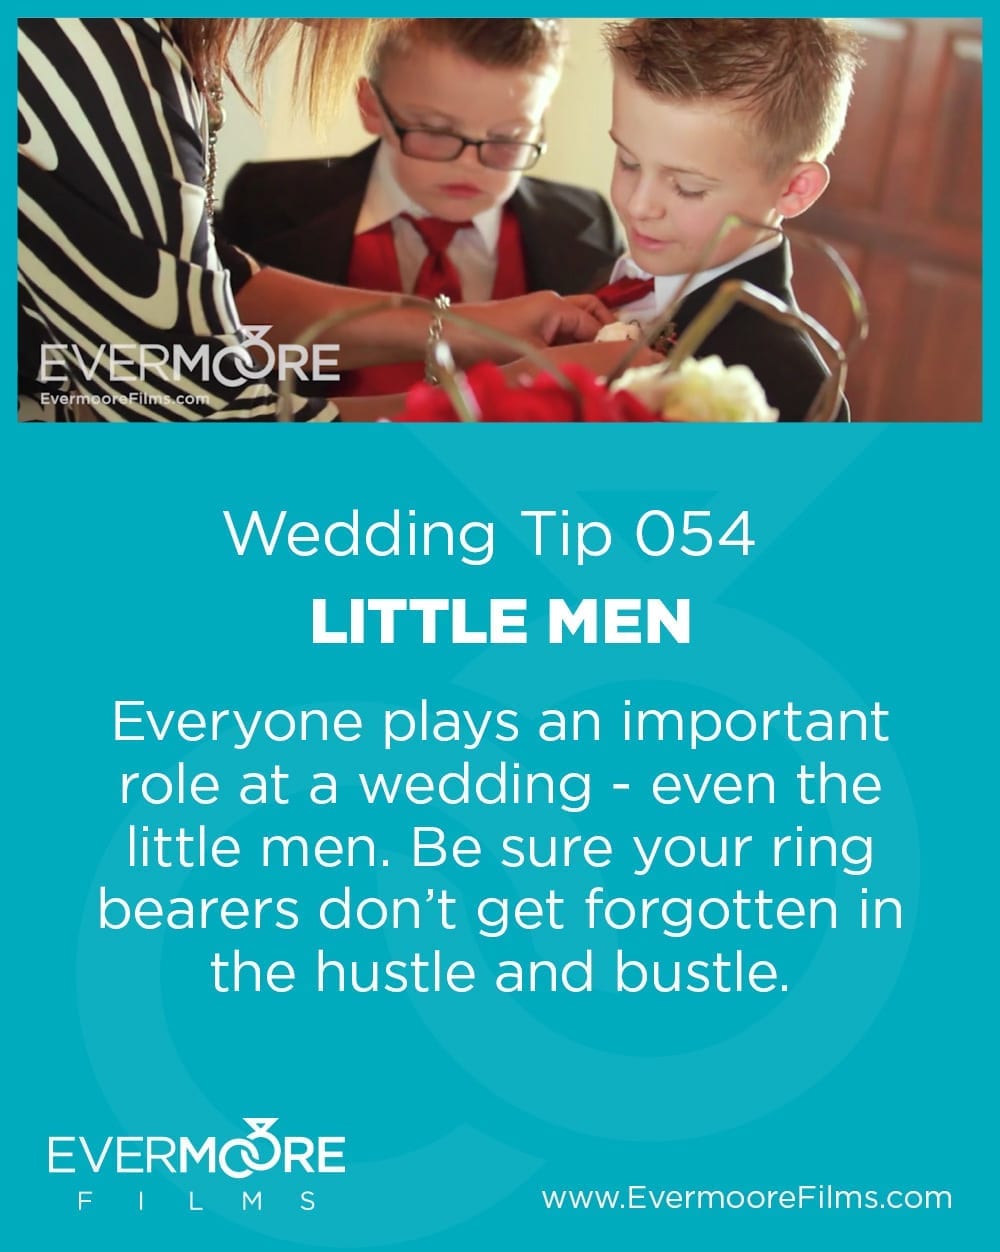 Little Men | Wedding Tip 054 | Evermoore Films | Evermoore plays an important role at a wedding - even the little men. Be sure your ring bearers don't get forgotten in the hustle and bustle.